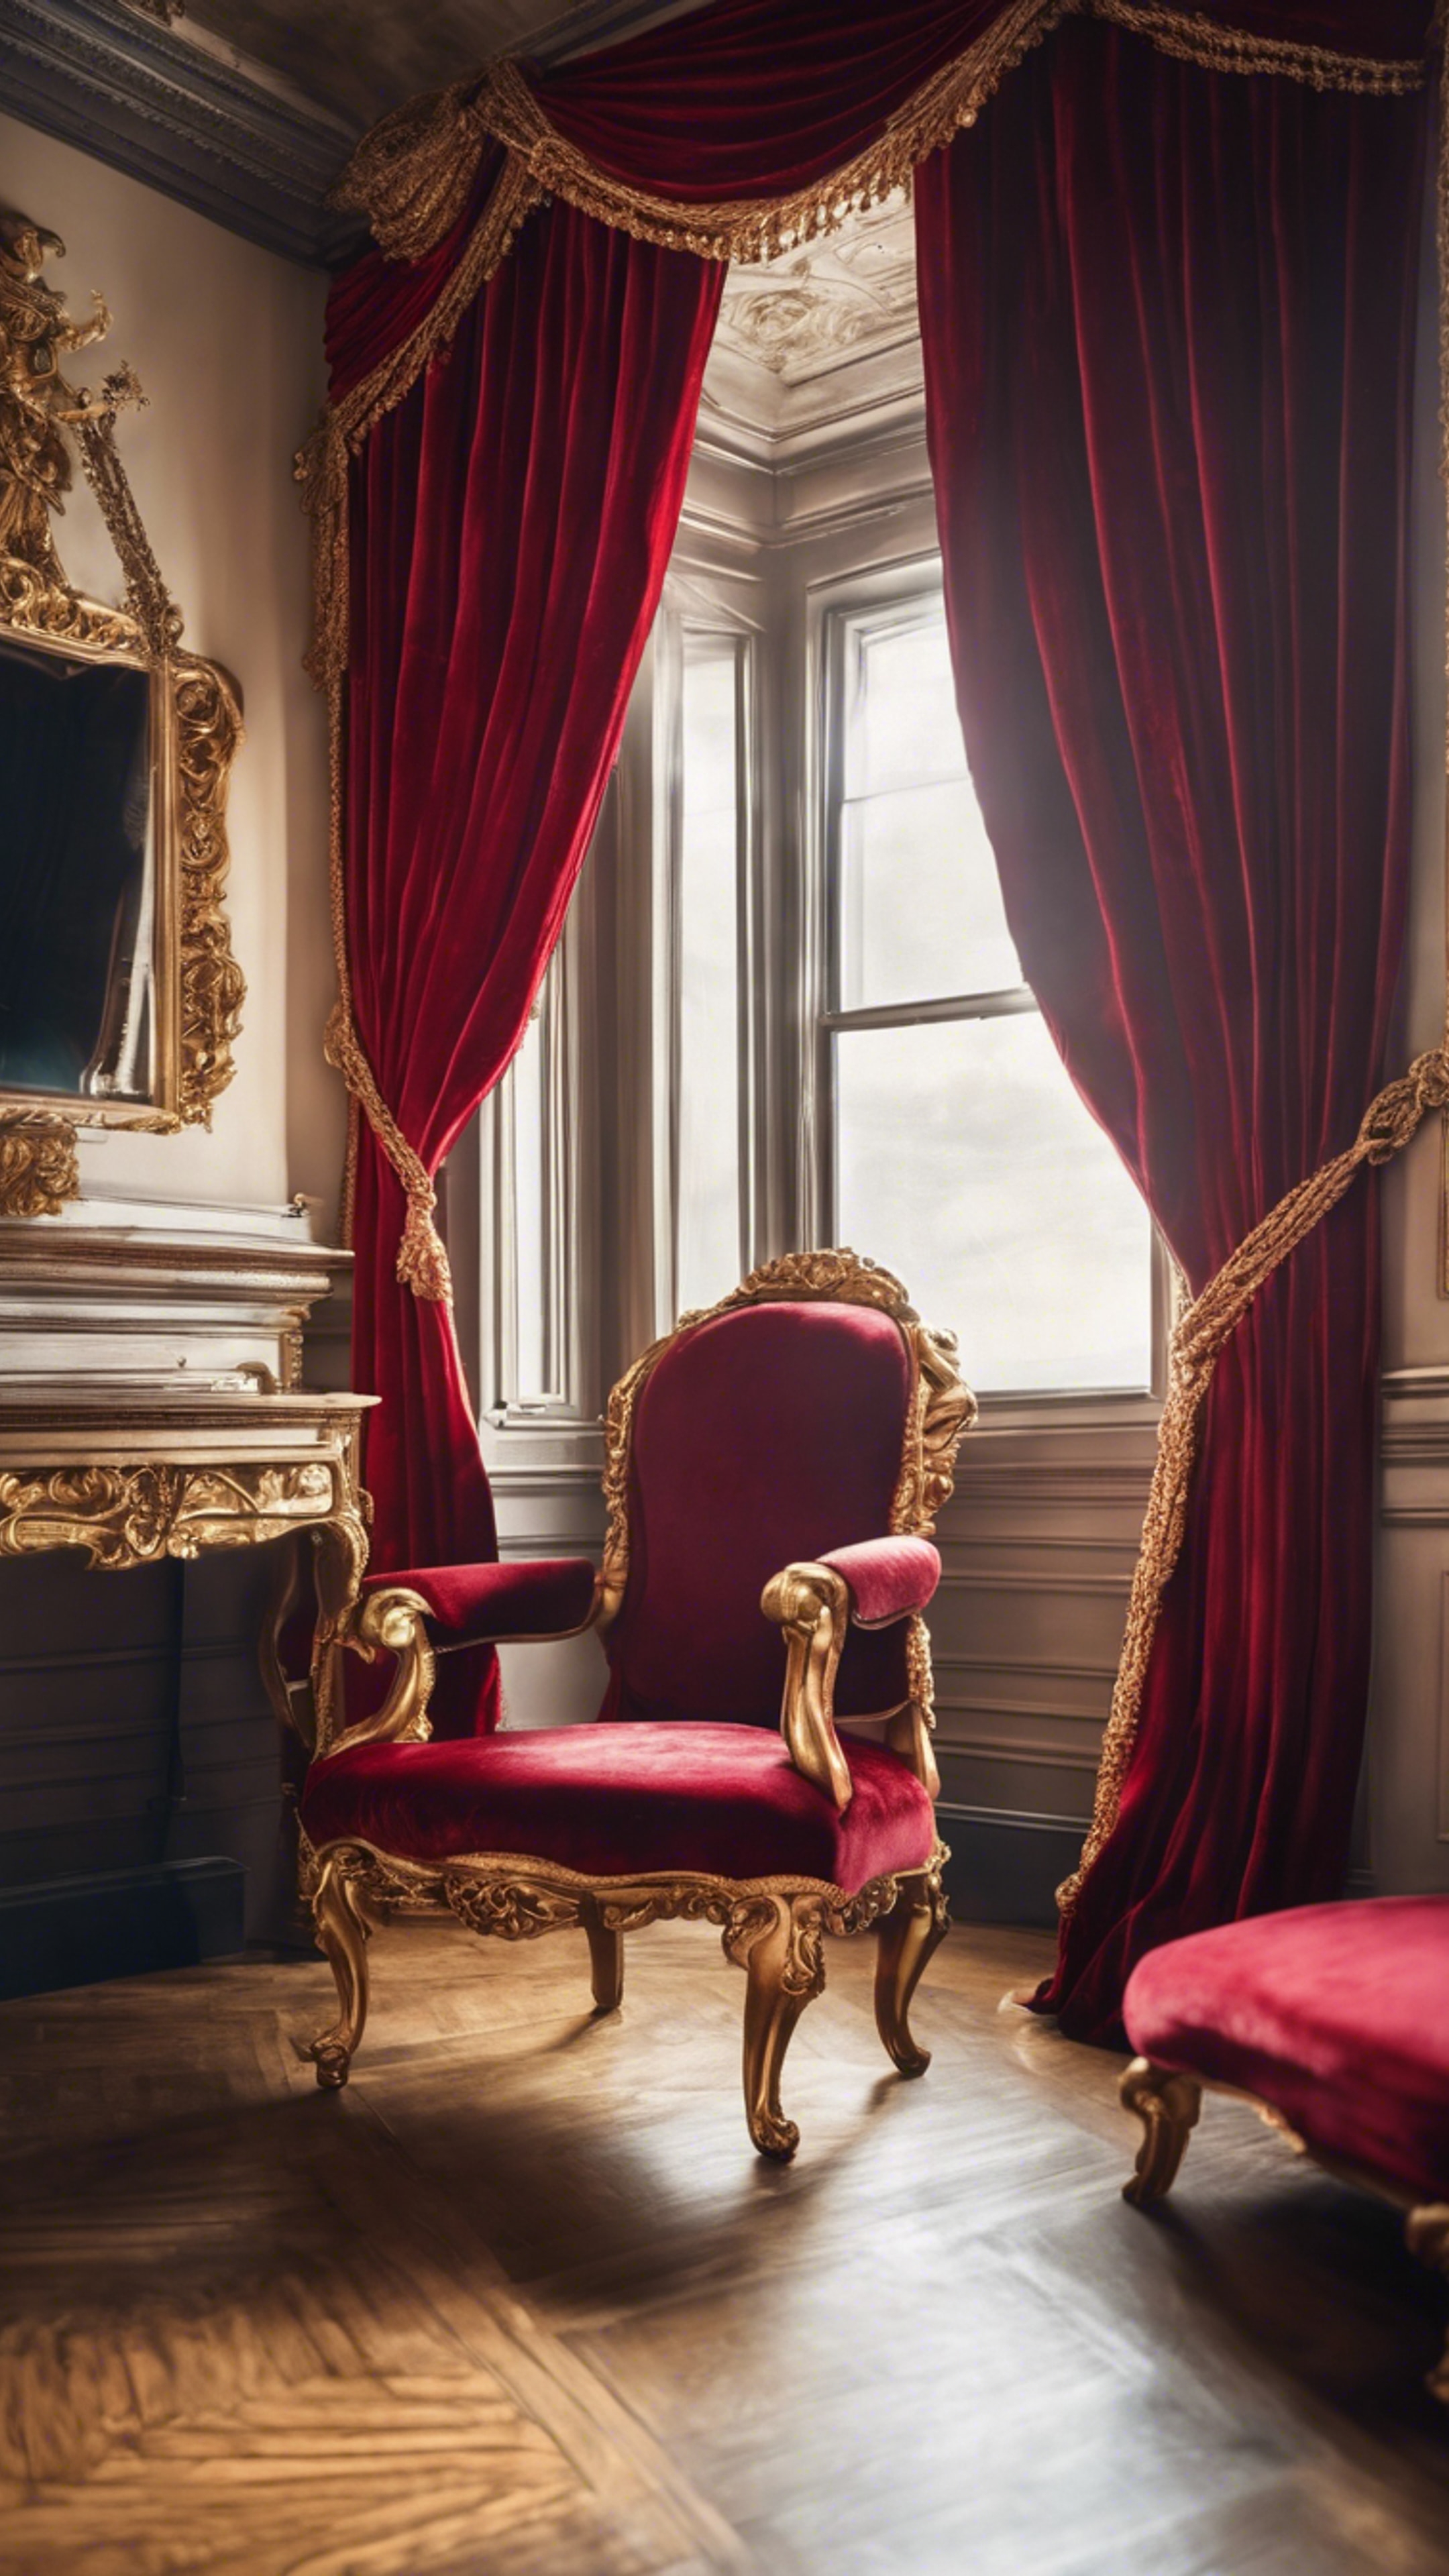 Red velvet drapes tied back with gold ropes in a grand victorian-style living room. Валлпапер[6c8dd2a9b4f74c0eb869]